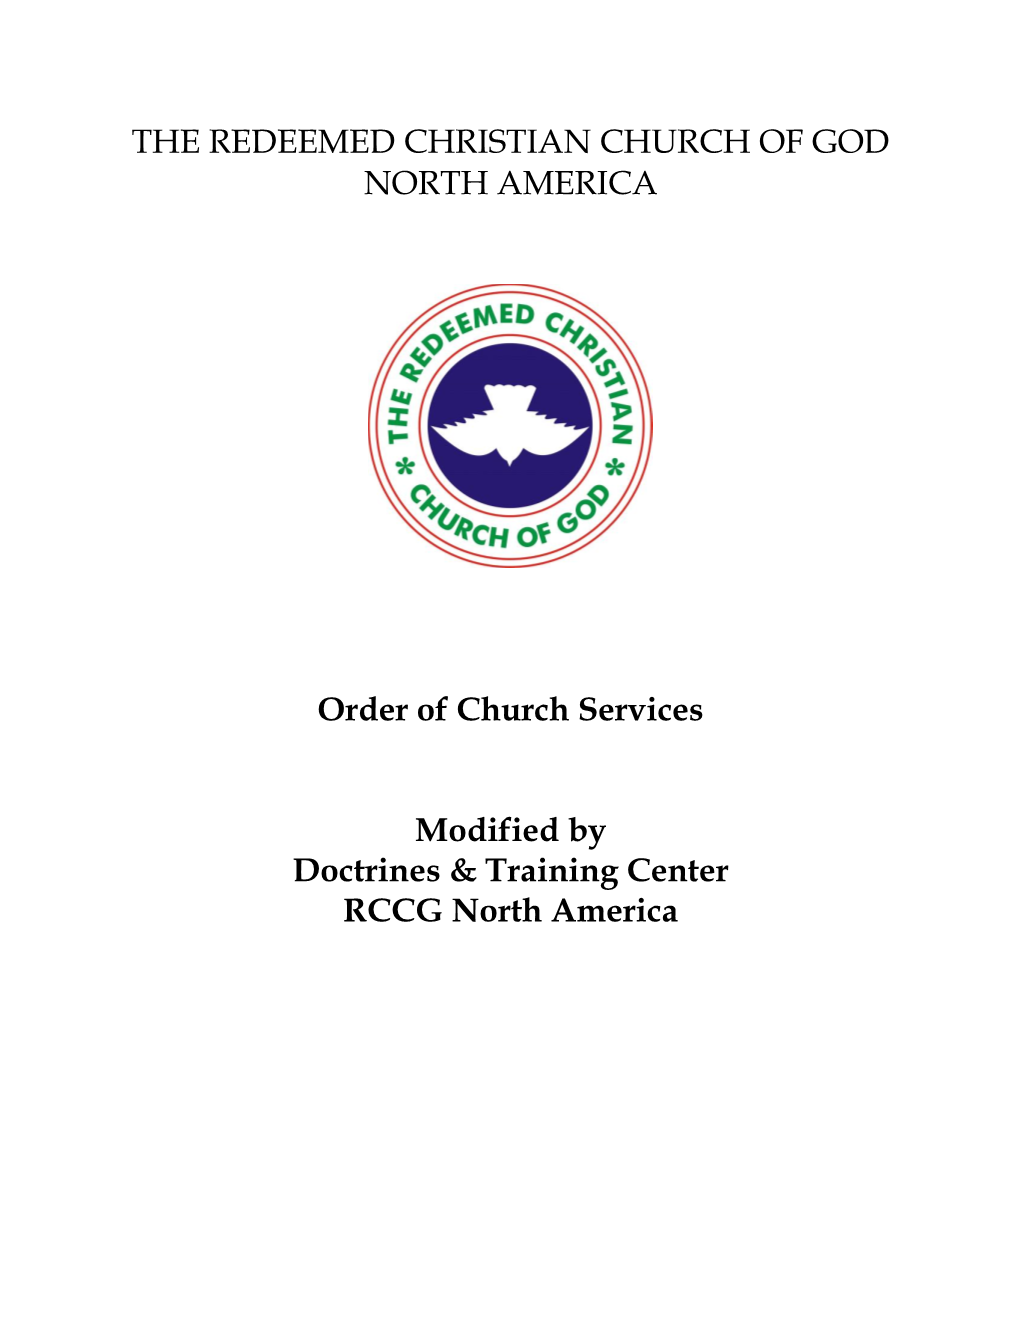 RCCGNA Order of Church Services